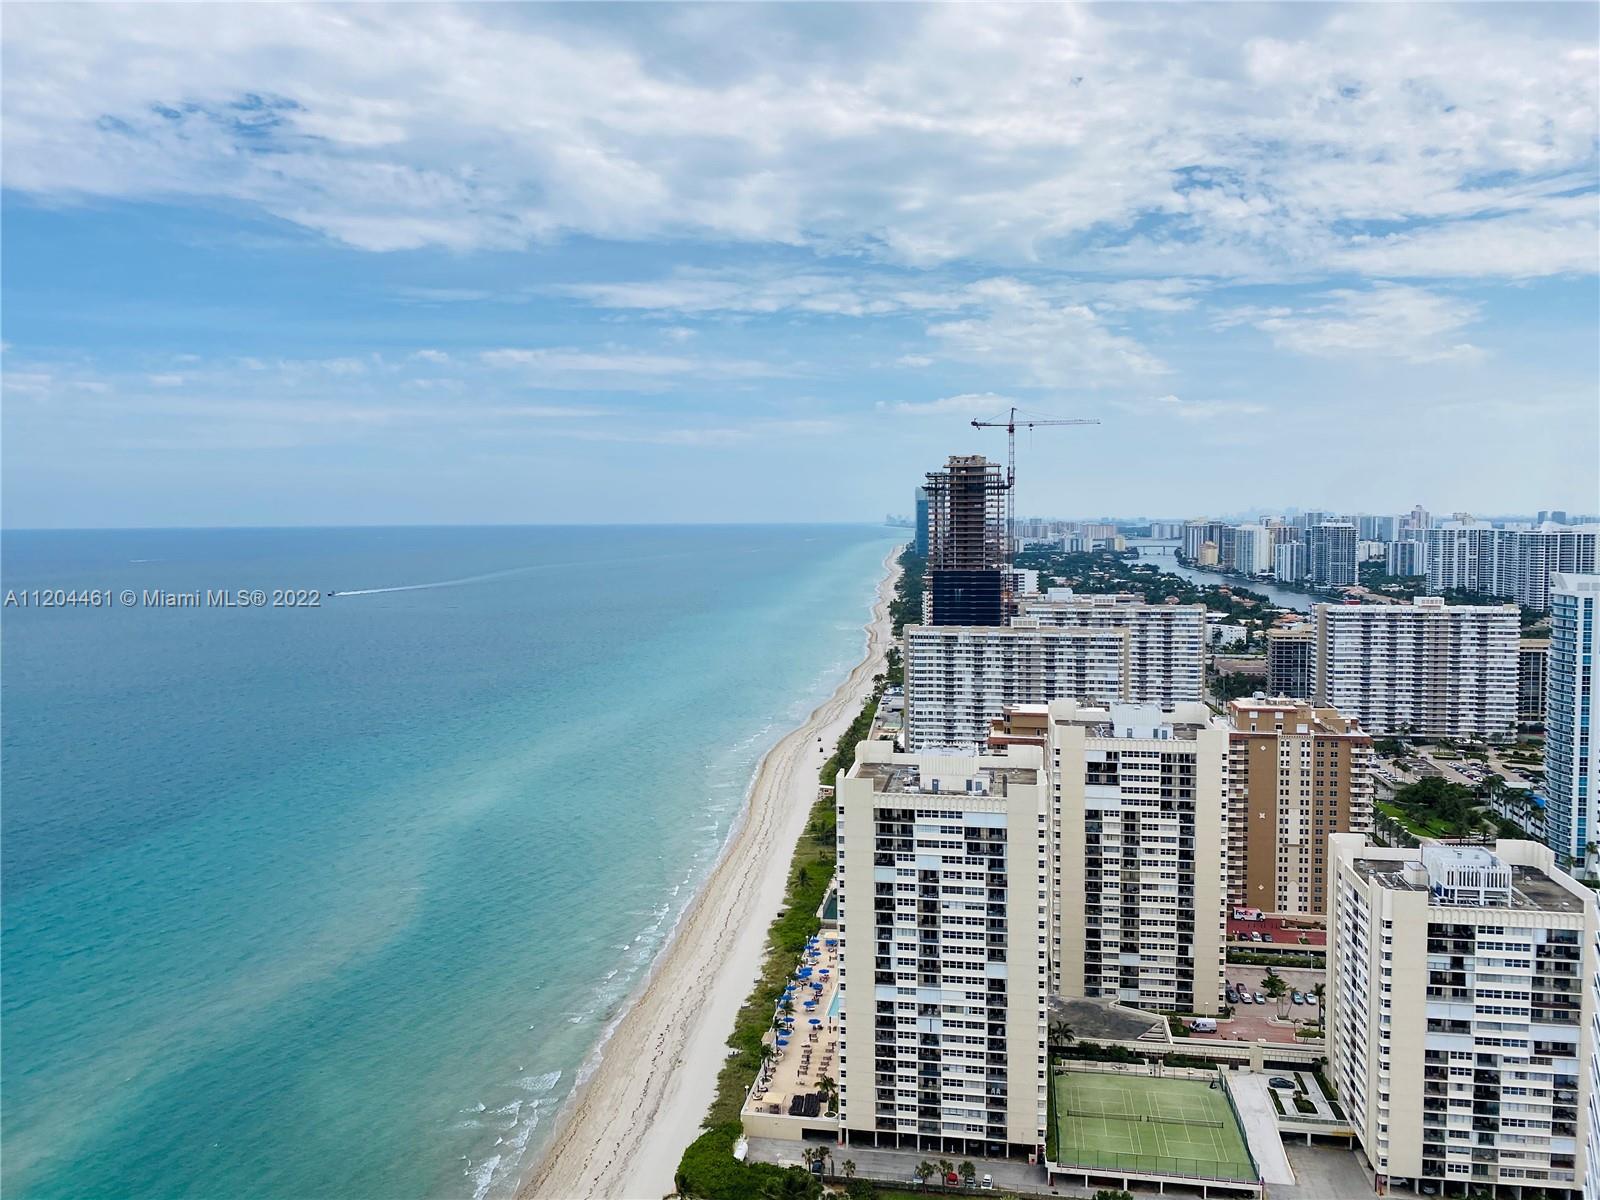 AMAZING UNIT IN THE PRESTIGE BEACH CLUB TWO CONDO, GREAT VIEW OF THE OCEAN, CITY AND BEYOND FROM THE 40TH FLOOR .2 BEDROOMS 3 FULL BATHROOMS PLUS A LARGE DEN USED AS 3 BEDROOM OR GUEST ROOM, FULLY FURNISHED .